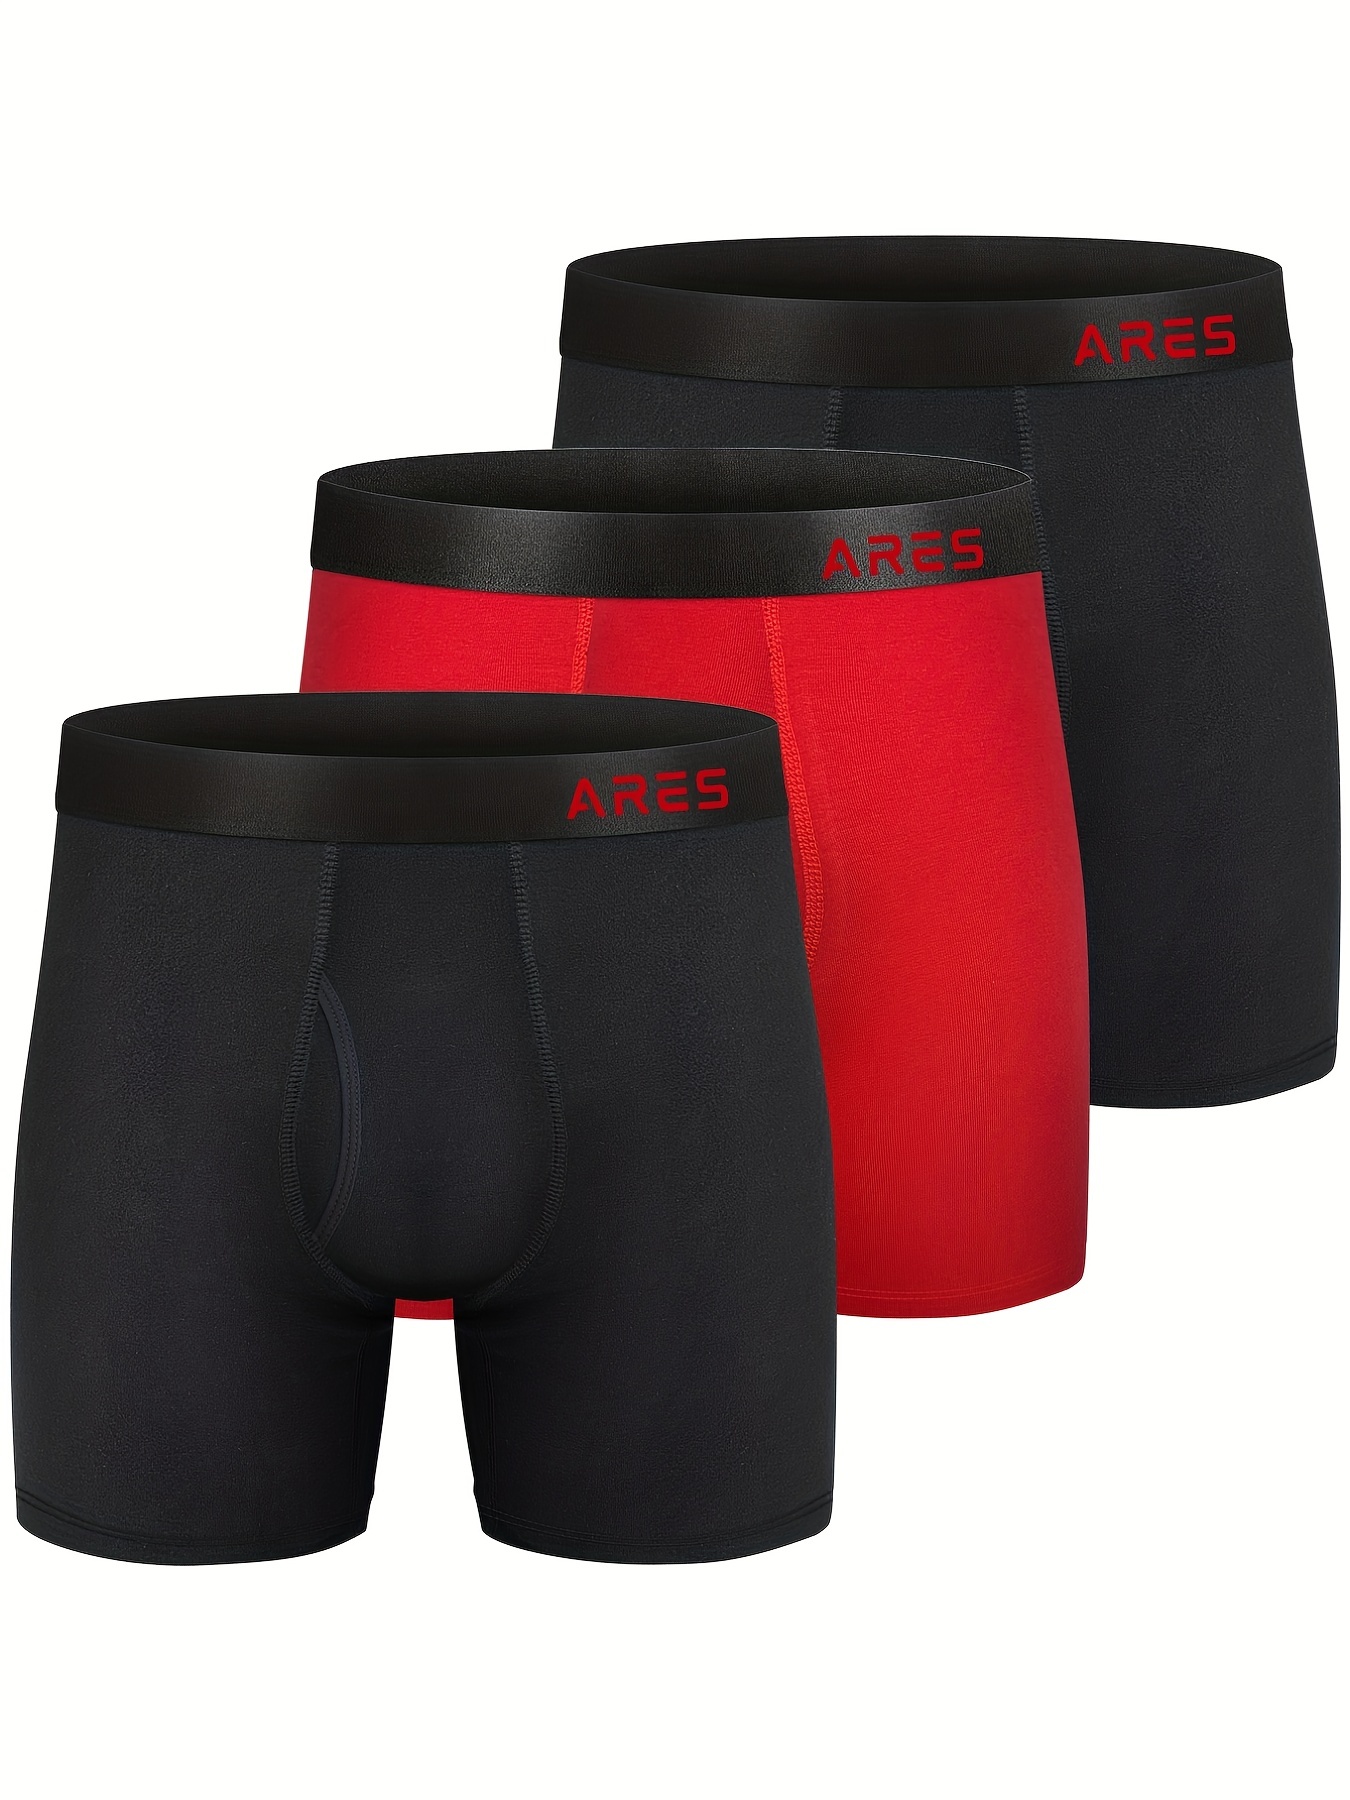 3pcs/set Multicolor Solid Boxer Briefs With No Front Fly For Men